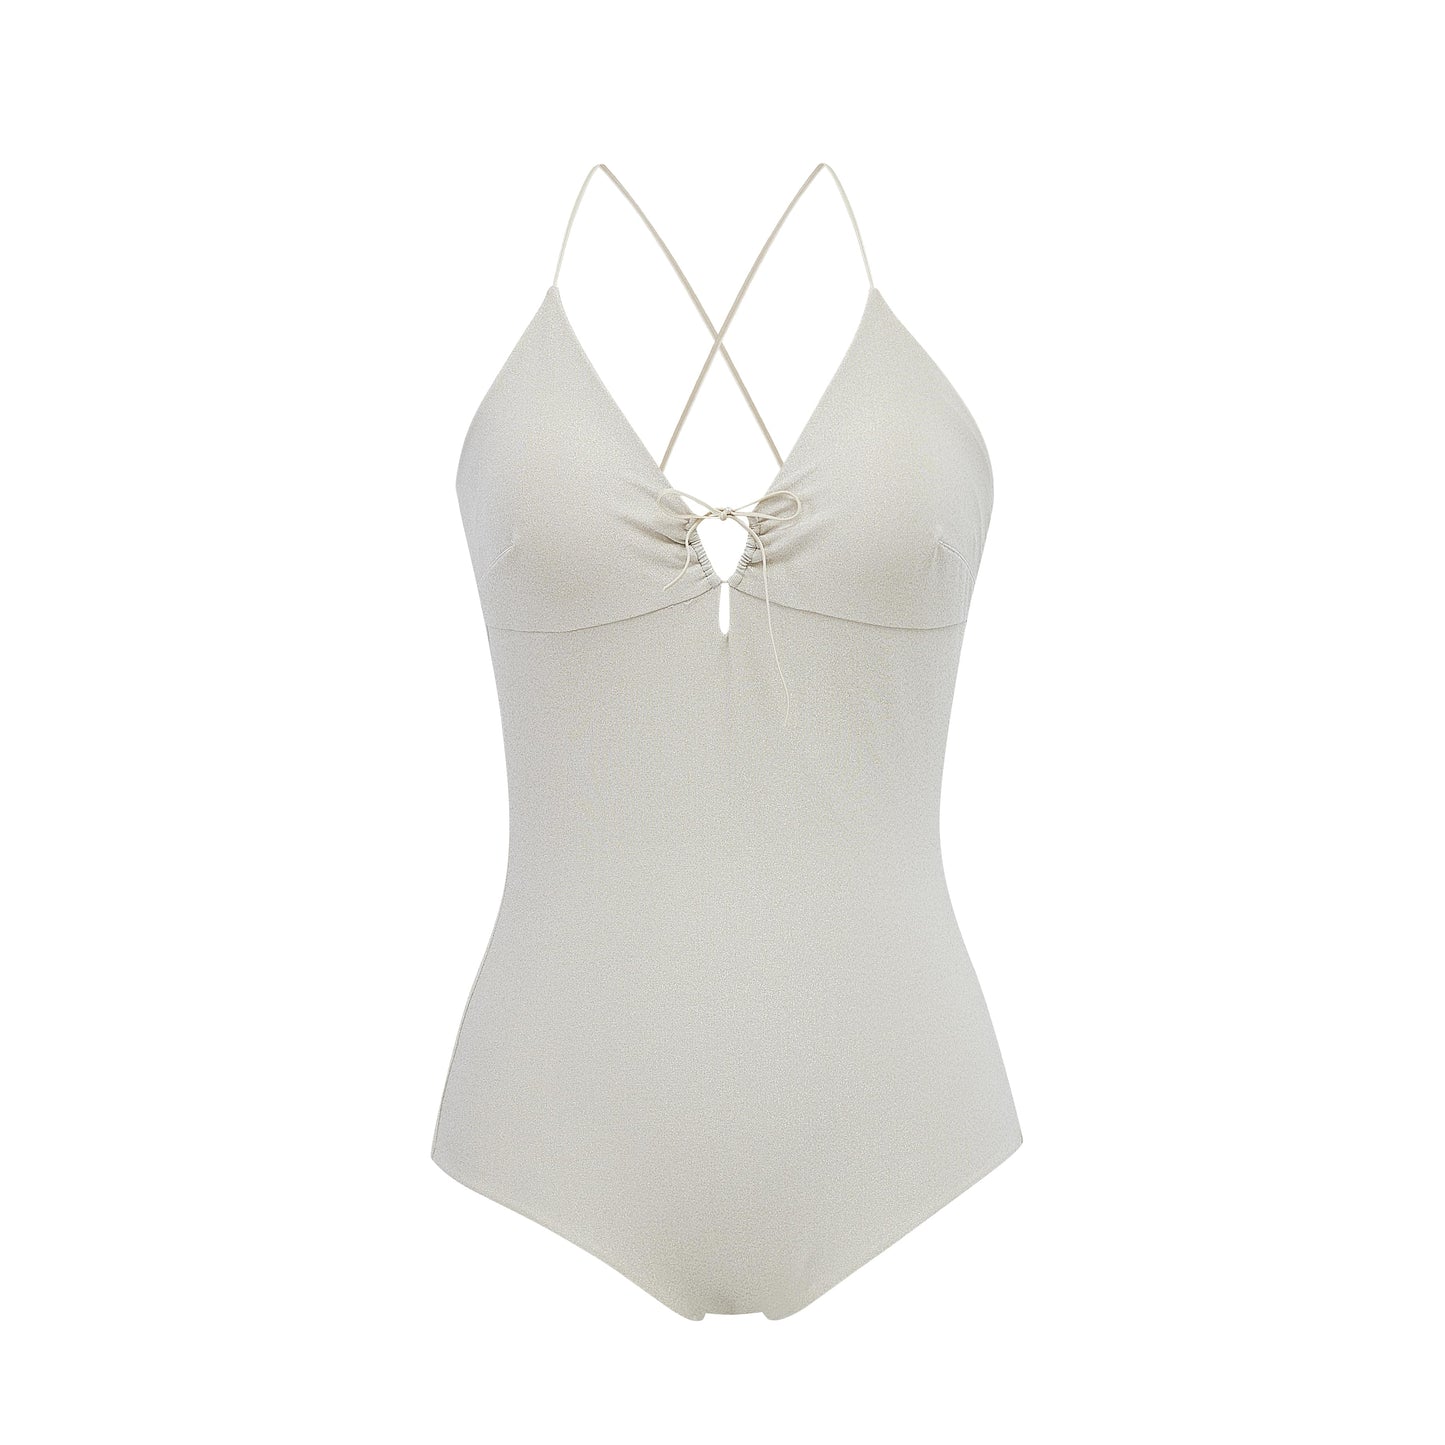 Flat lay image of gold one piece swimsuit with spaghetti straps and keyhole neckline design